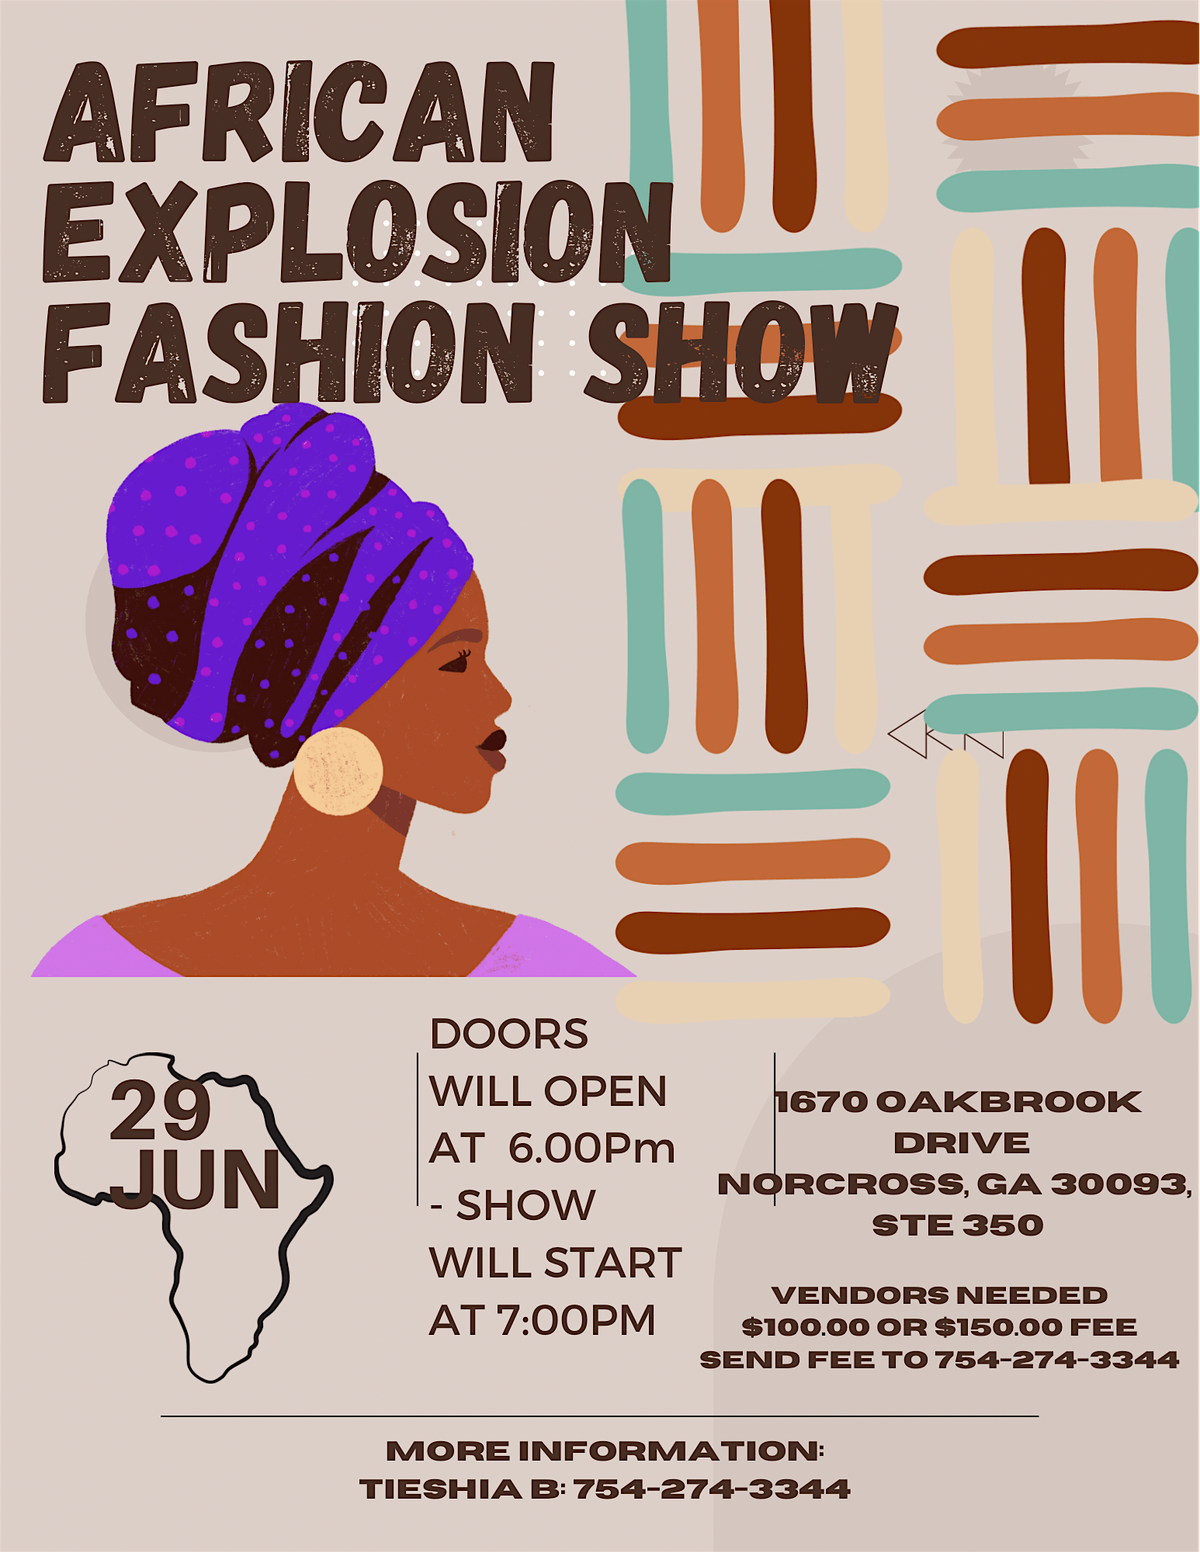 African Explosion Fashion Show